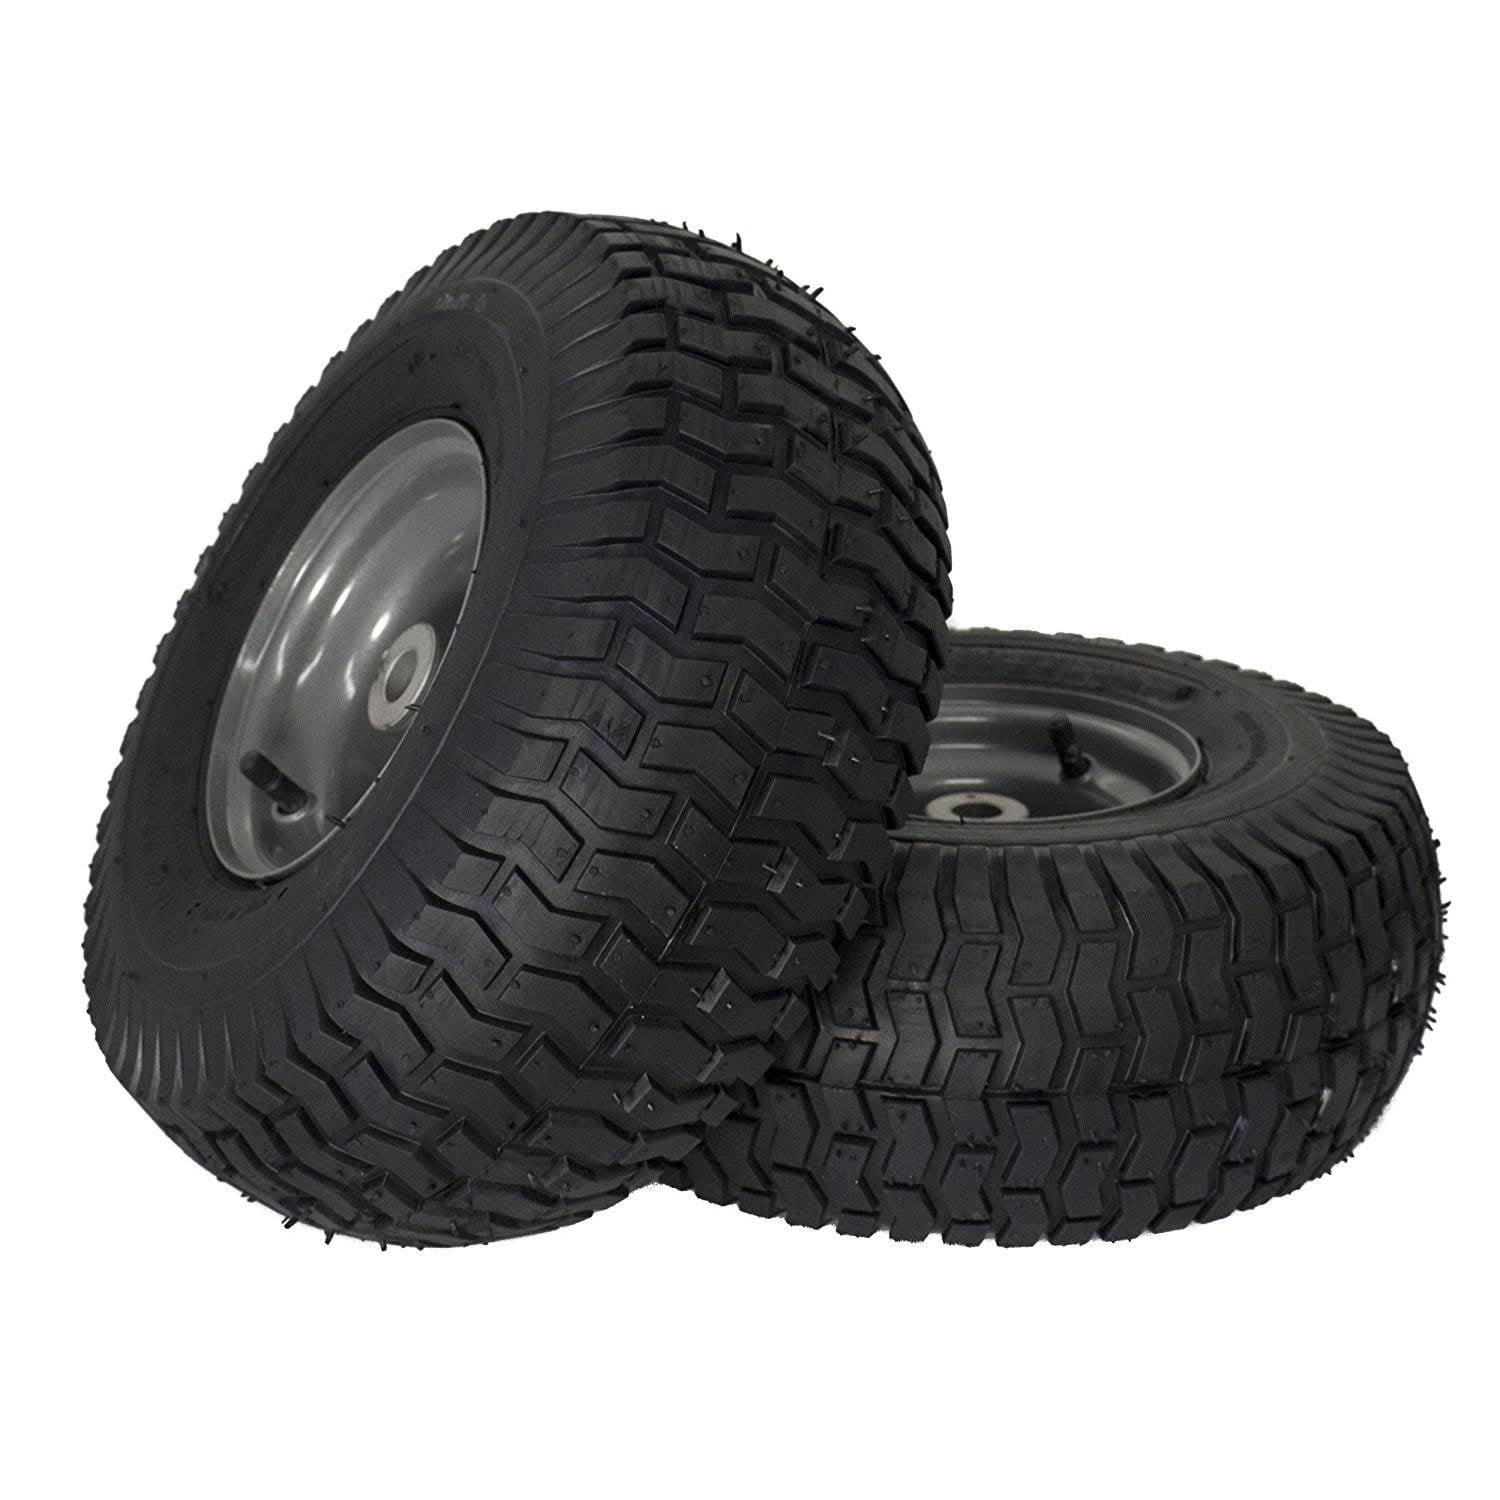 15 x 6.00-6 Tire and Wheel Set for Lawn Tractors with 15 Wheels with 3/4 Bearings 2 Pack 